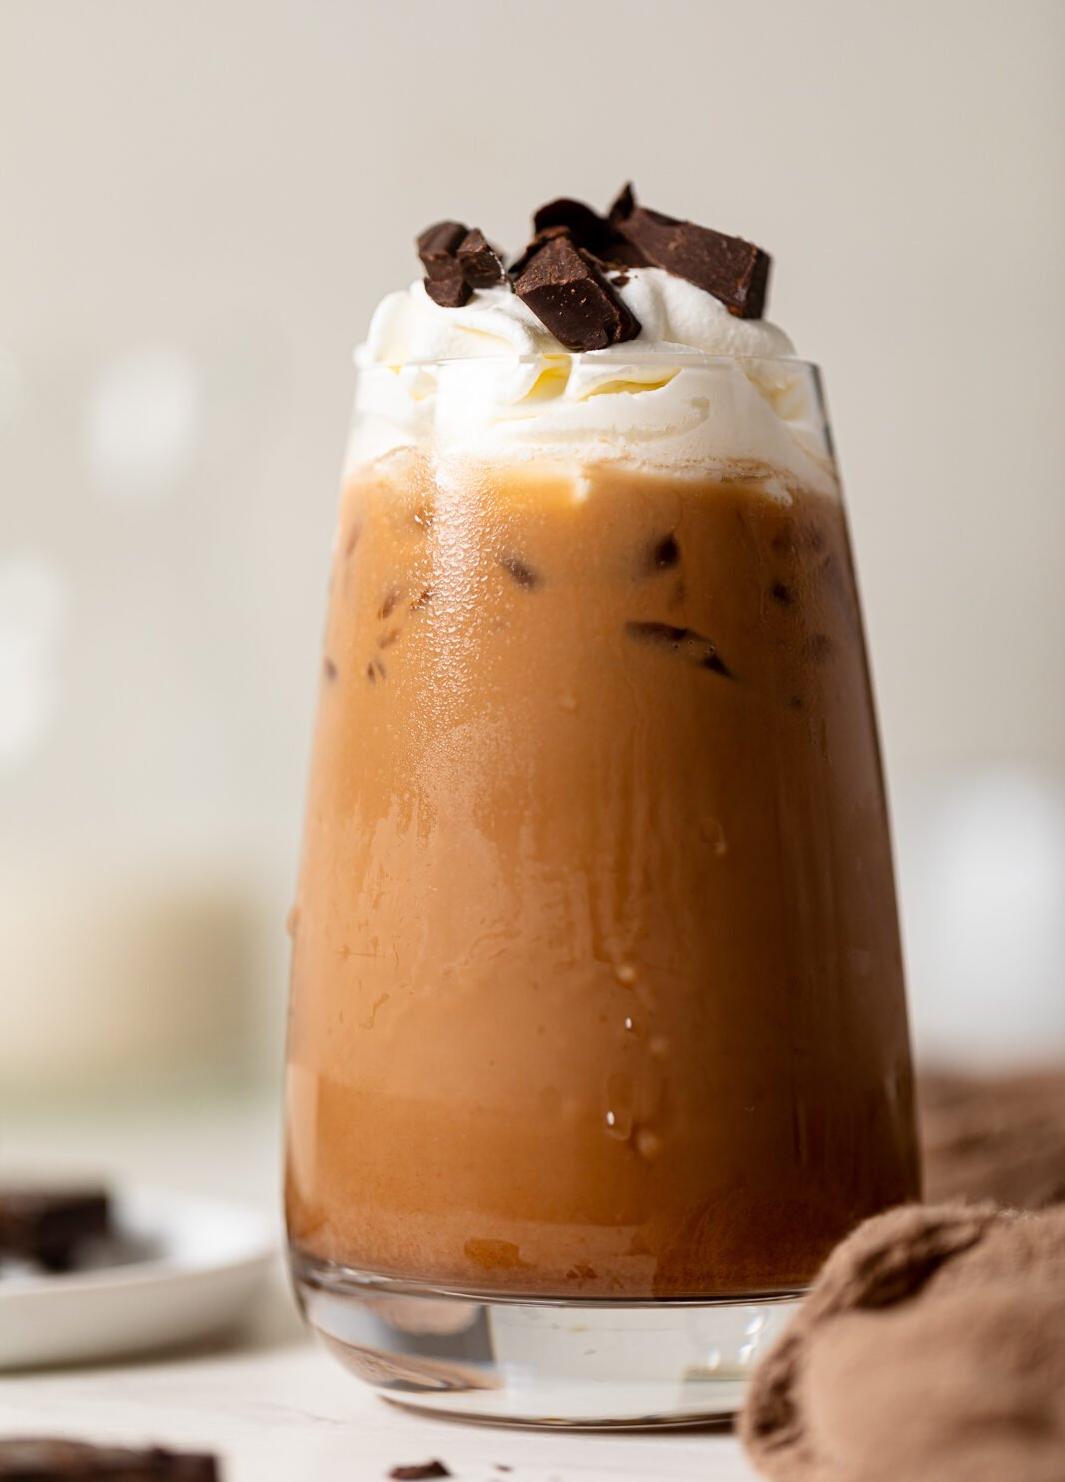  Satisfy your coffee cravings with a chilled mocha latte.